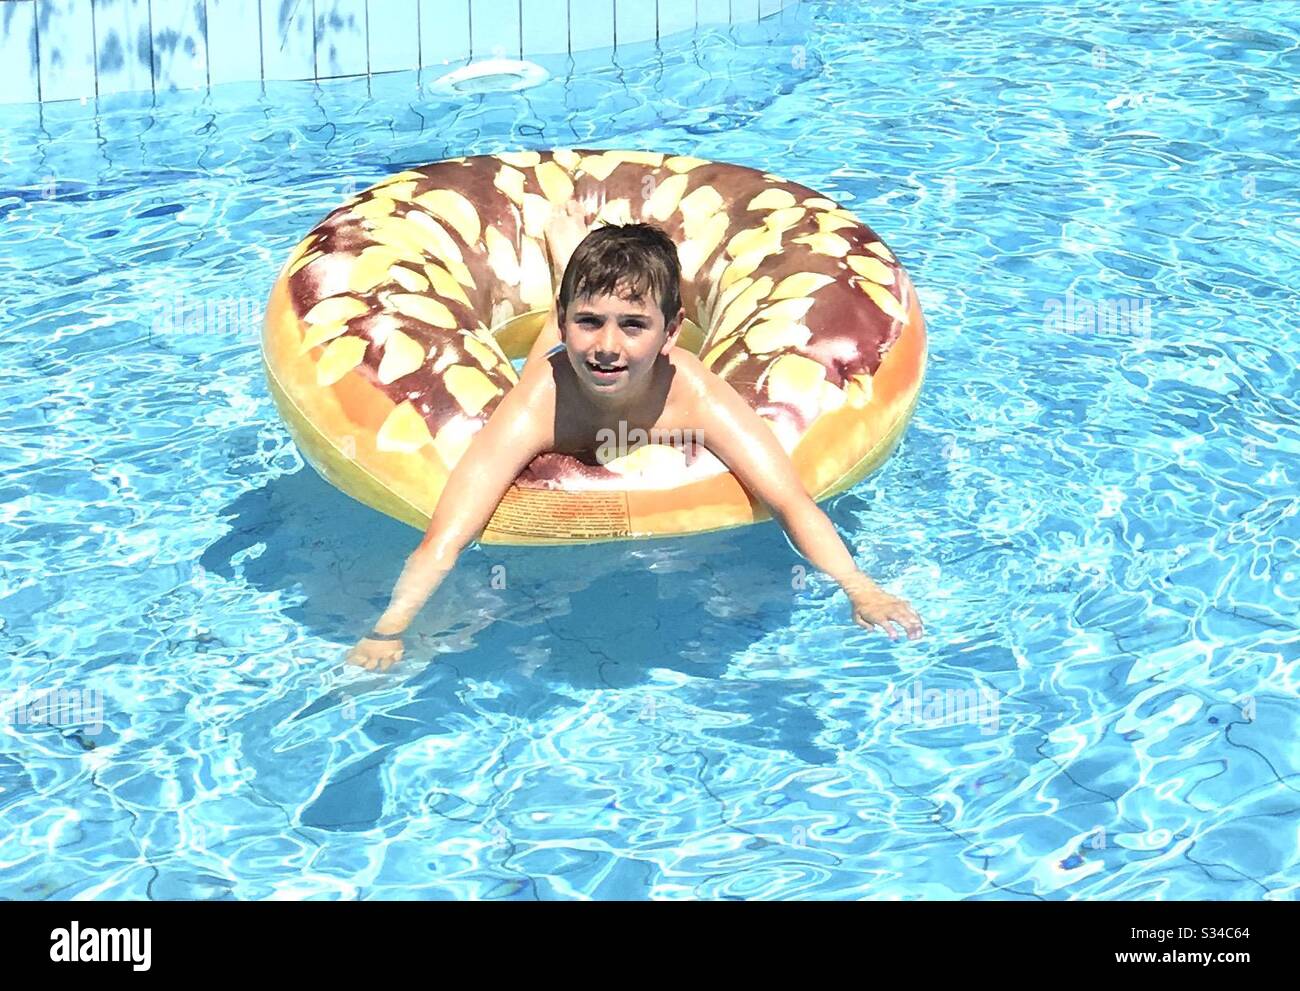 Boy in swimming pool on holiday Stock Photo